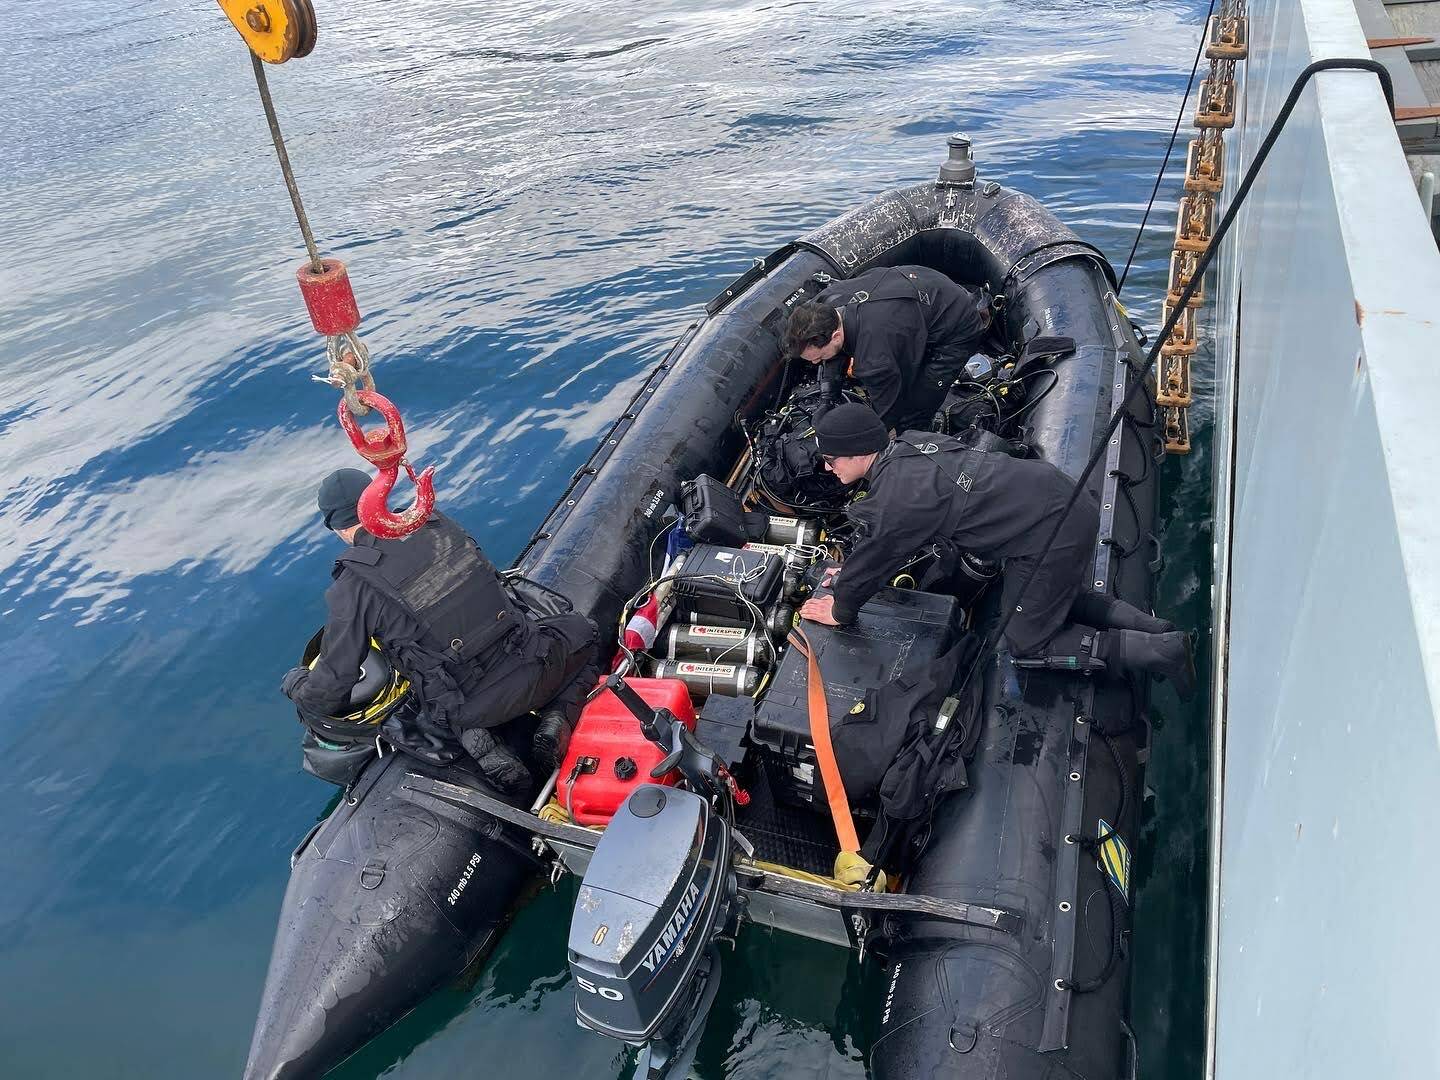 Royal Canadian Navy divers load tanks onto a boat as they prepare to go investigate a simulated naval mine in Stephens Passage on March 6, 2022 as part of exercise Arctic Edge 2022. (Michael S. Lockett / Juneau Empire)